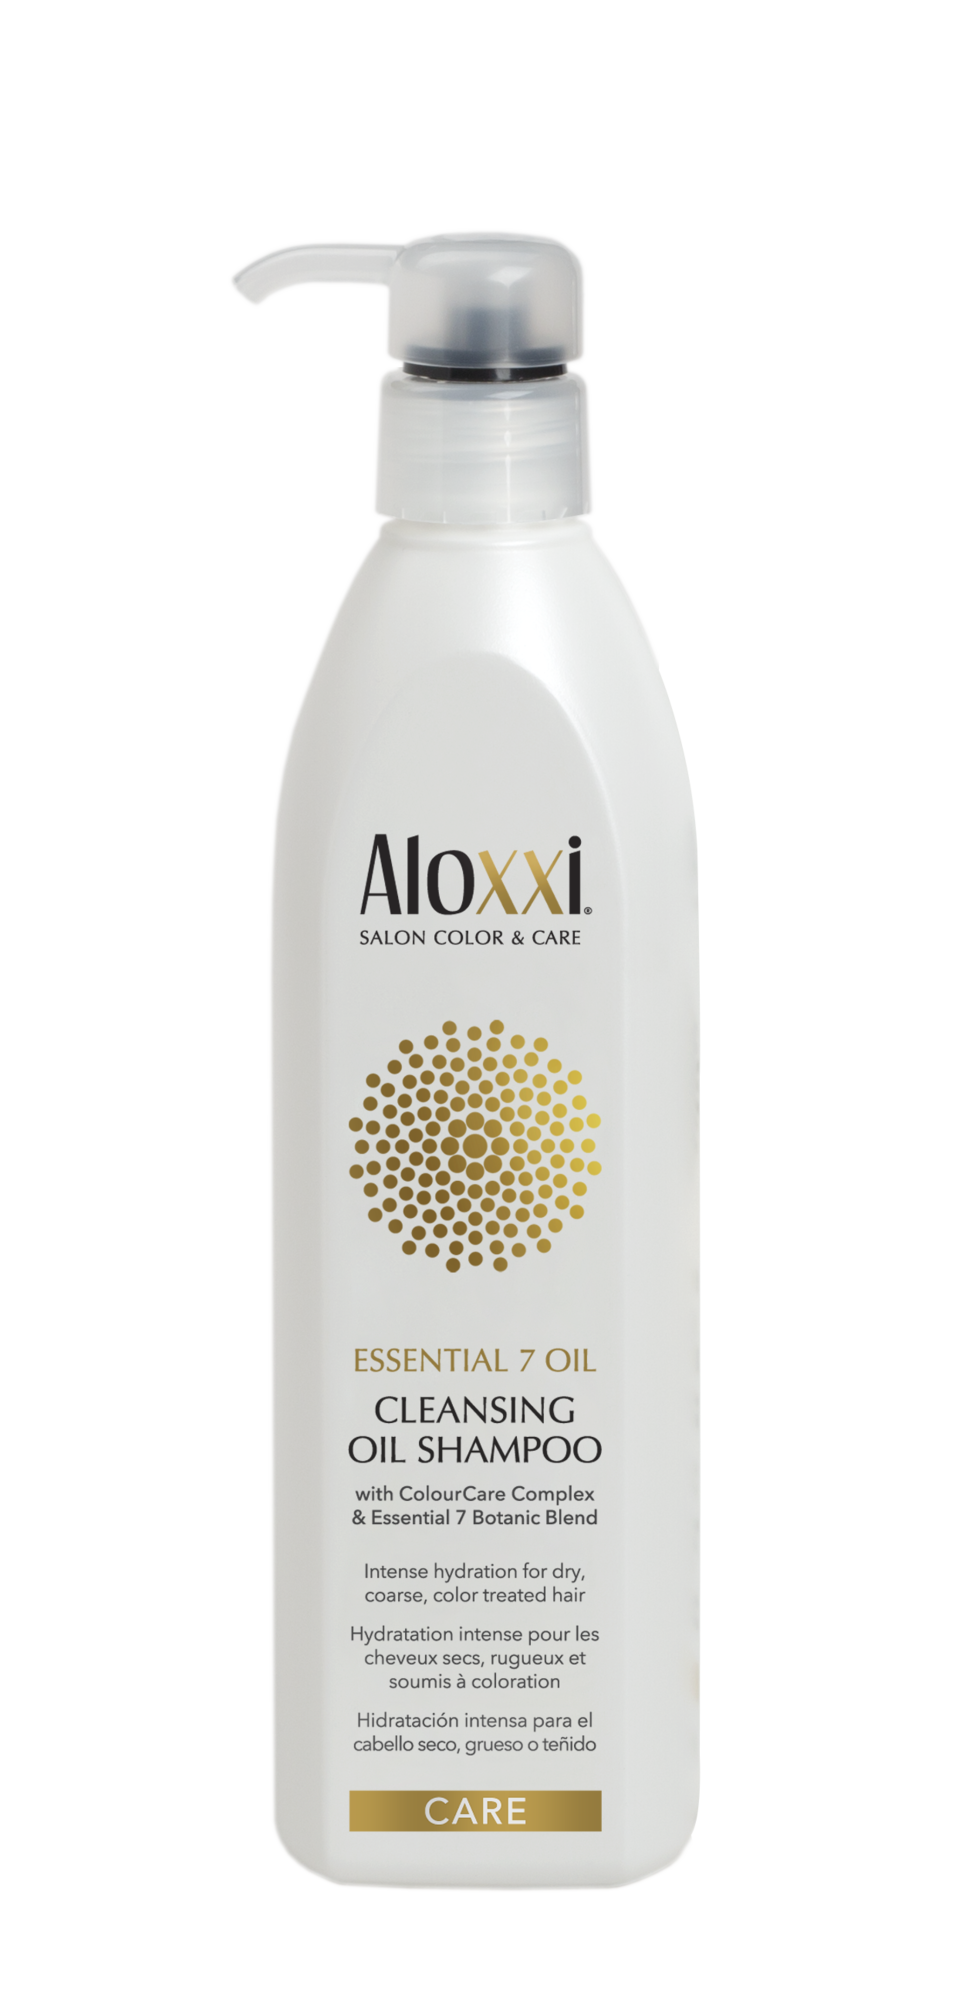 Aloxxi Essential 7 Cleansing Oil Shampoo 300ml